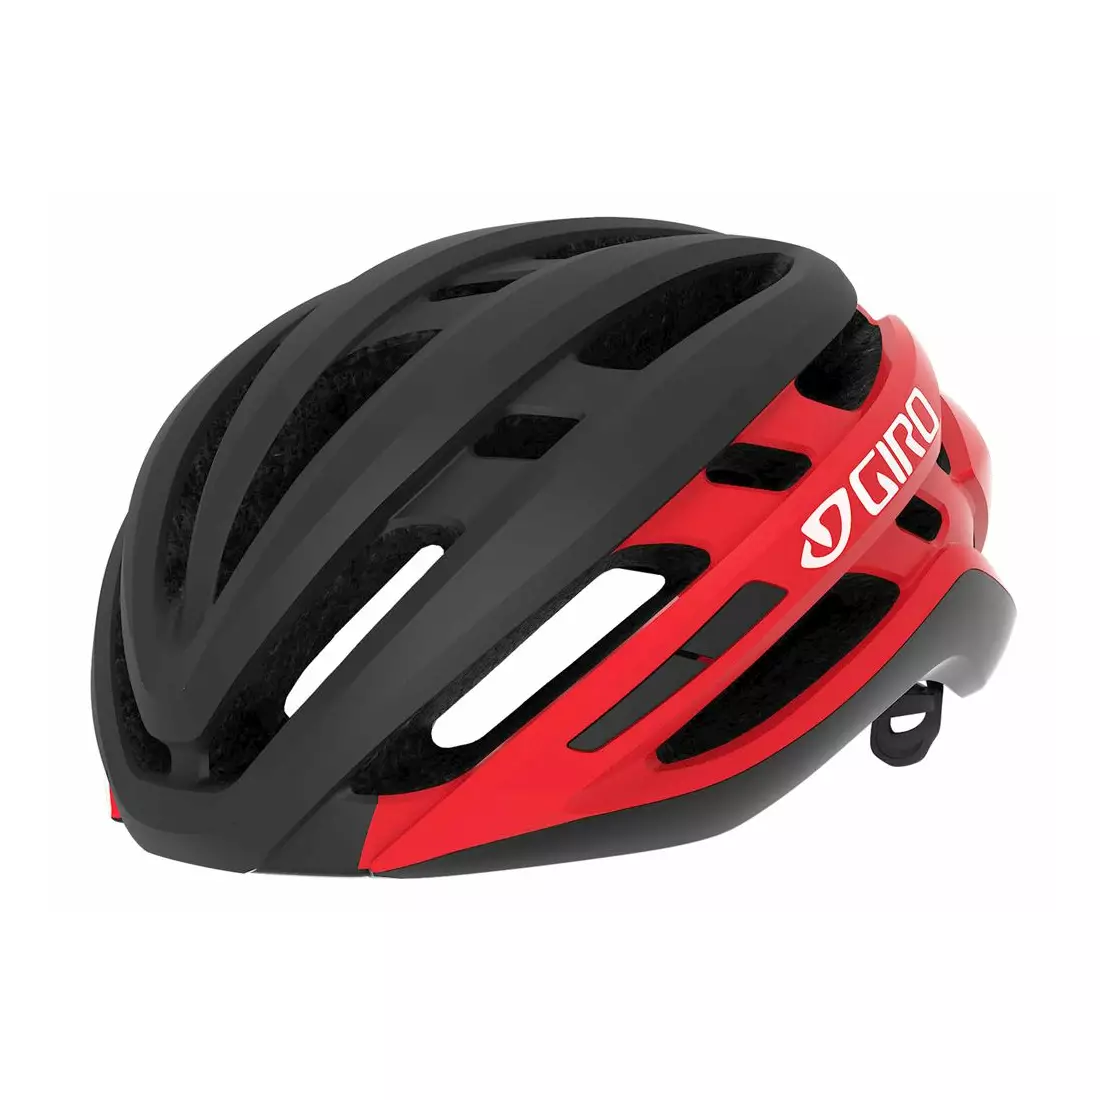 GIRO AGILIS INTEGRATED MIPS kask rowerowy szosowy, matte black bright red